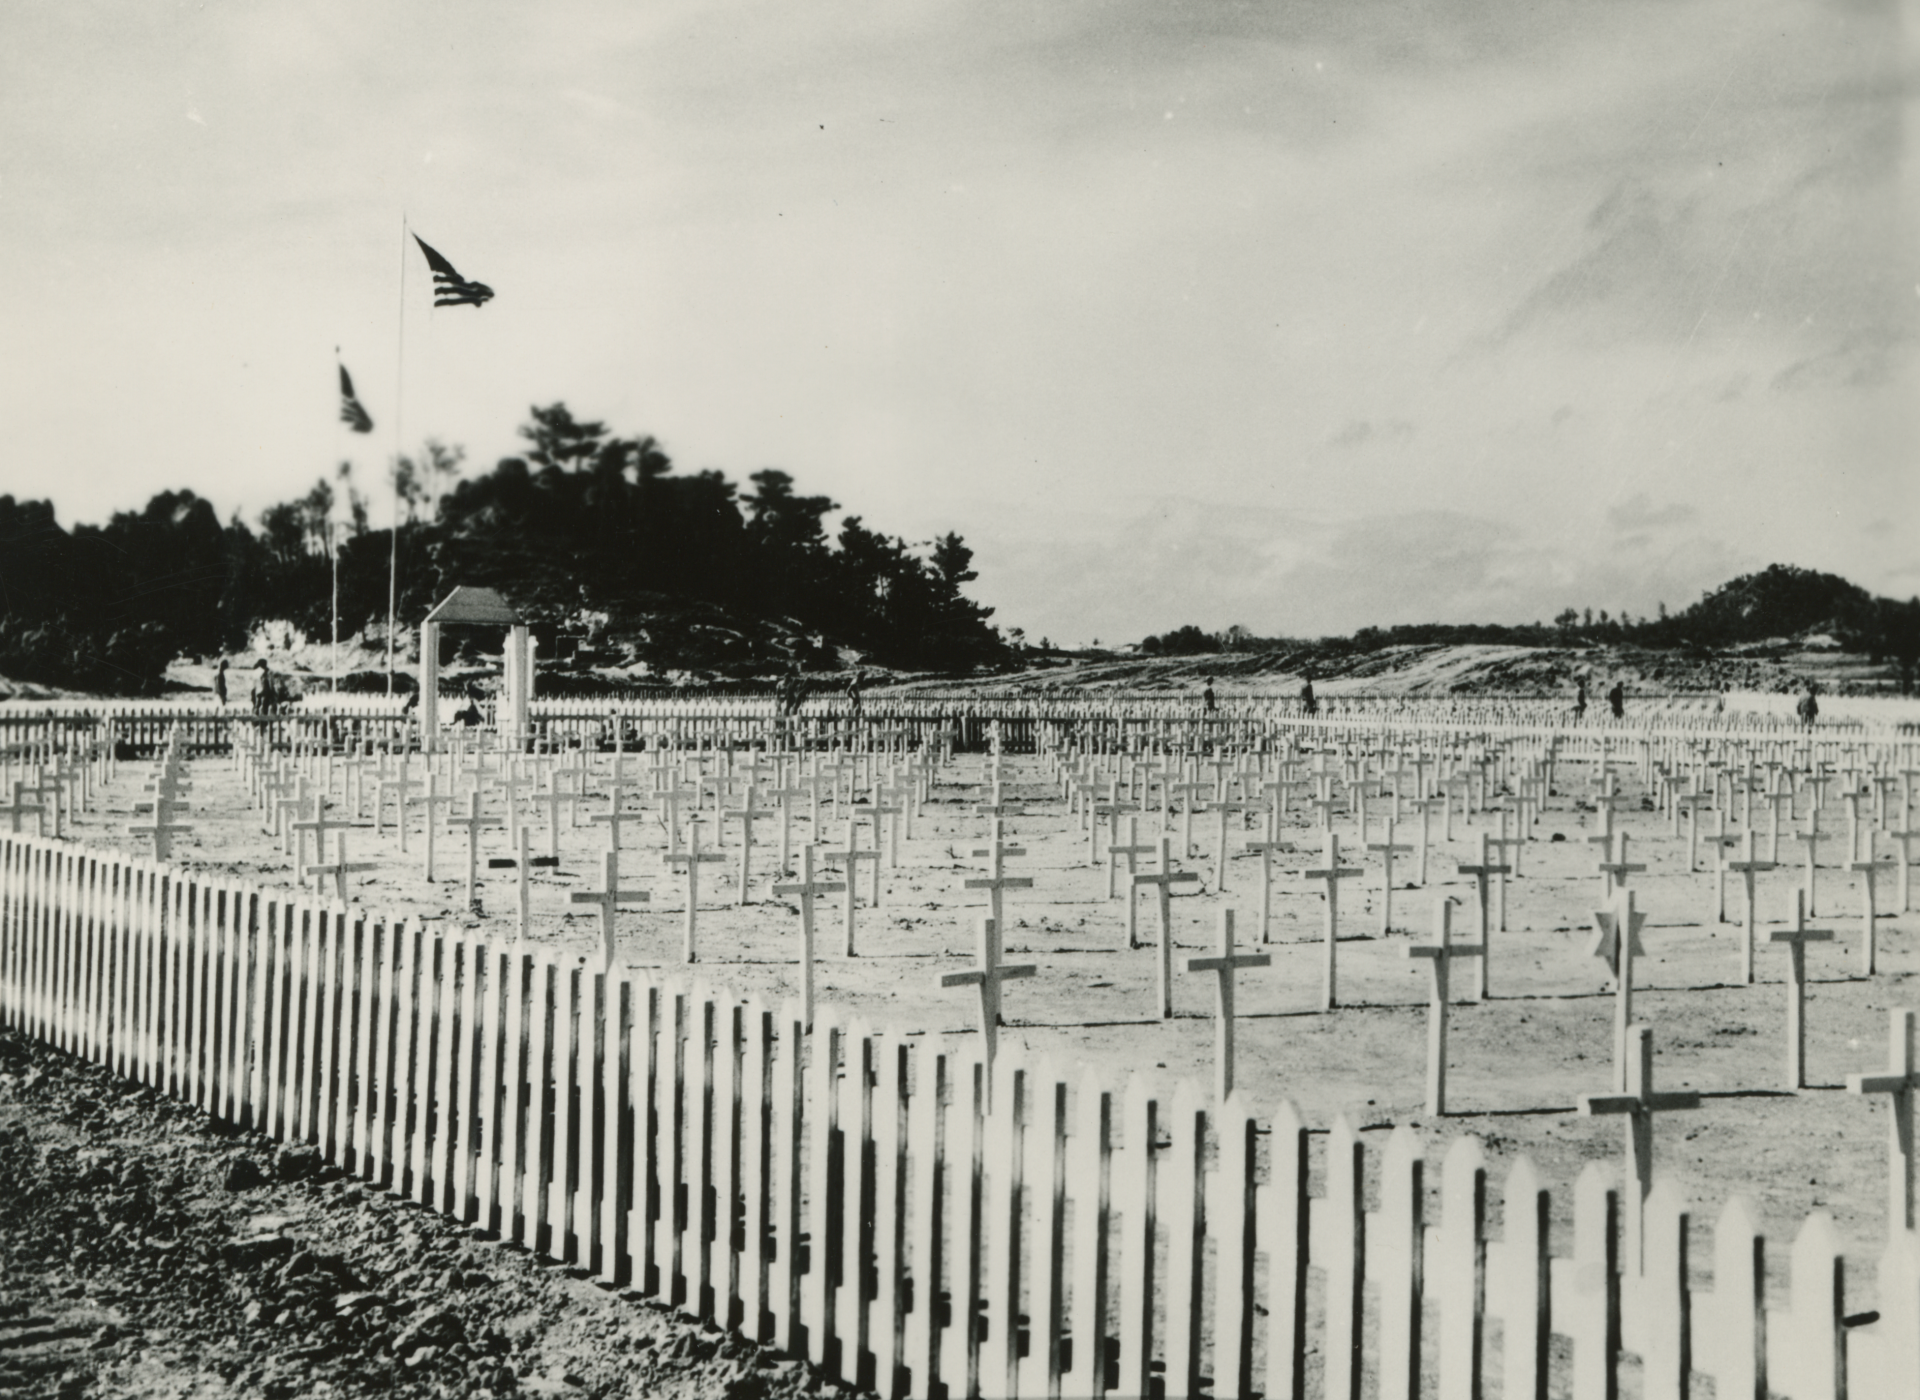 The 96th Division Cemetery on Okinawa two days after the battle ended. US Army official photograph. The National WWII Museum, Gift of Thomas J. Hanlon, Accession #2013.495.1138